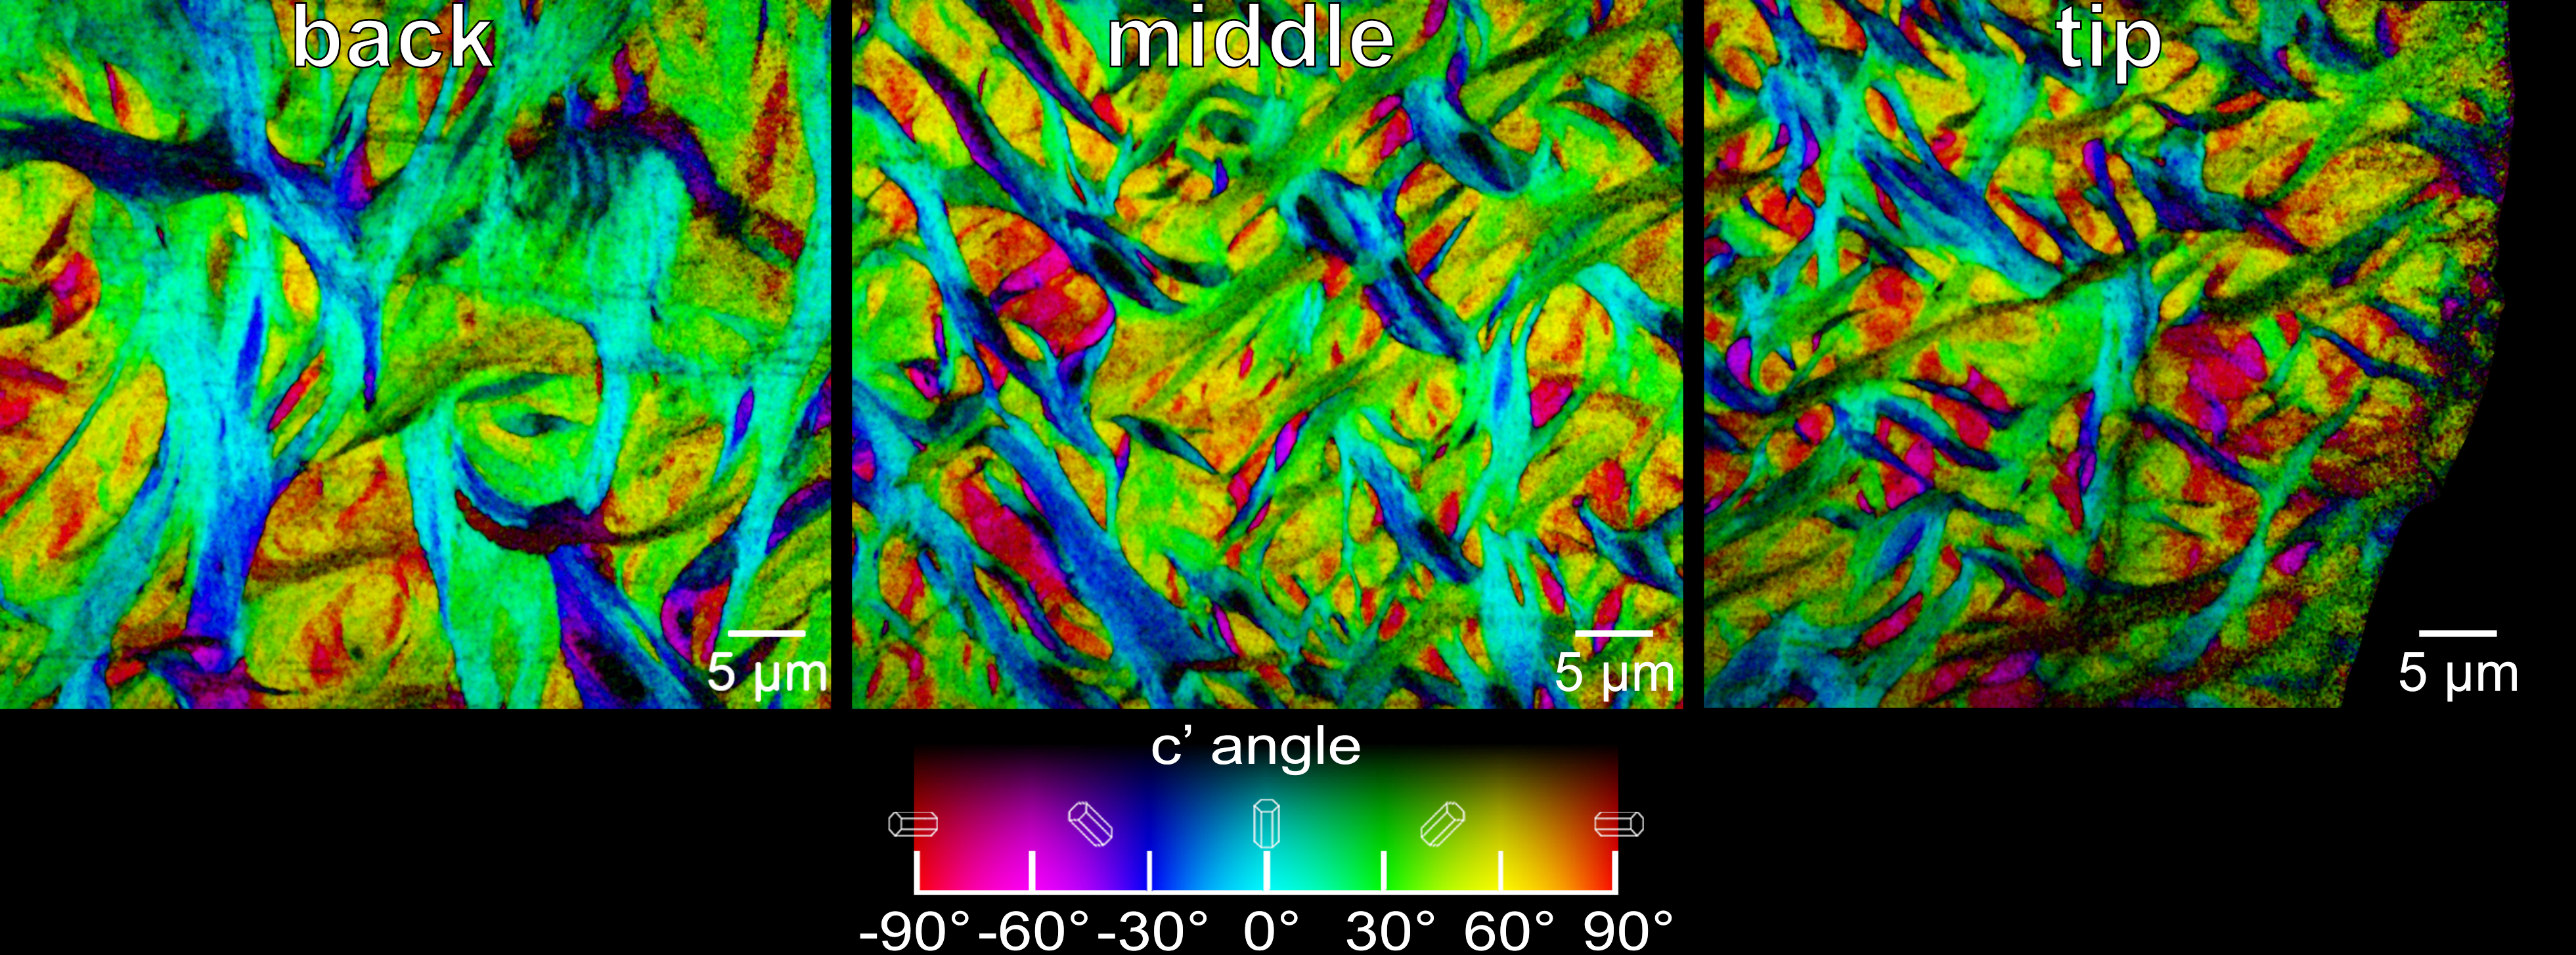 An X-ray-based technique known PIC mapping shows the size and orientation of fibers at the back (left), the middle (center), and the tip (right) of the enameloid layer of a parrotfish’s biting tooth. The orientation angle of the crystals is color-coded (chart at bottom). (Credit: Berkeley Lab)